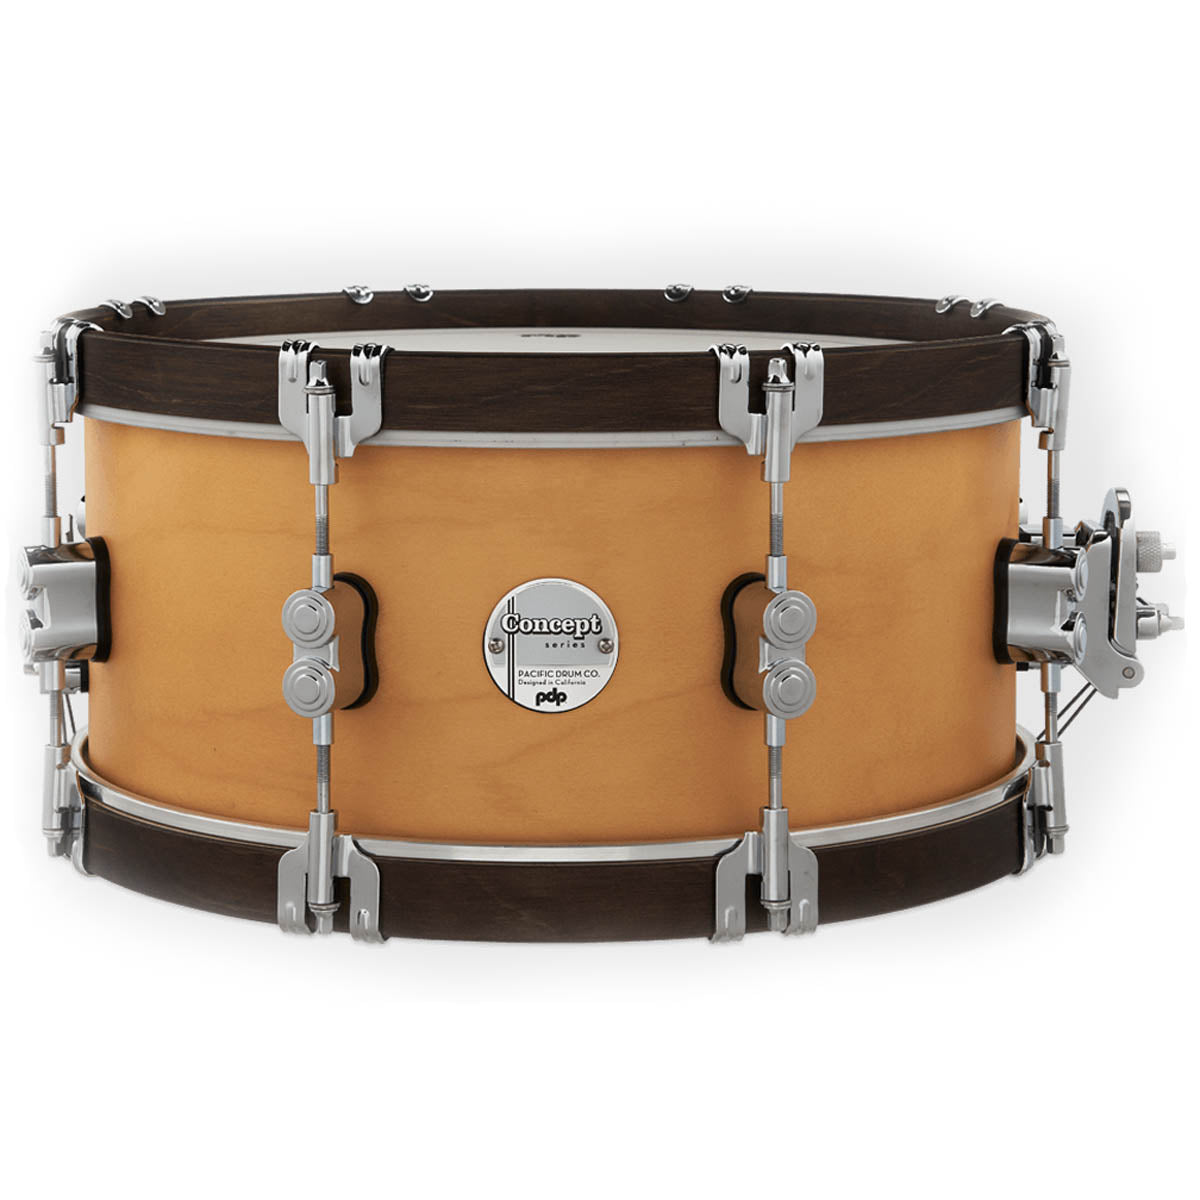 PDP by DW Concept Classic 14"x6.5" Snare Drum with Wood Hoops in Natural/Walnut